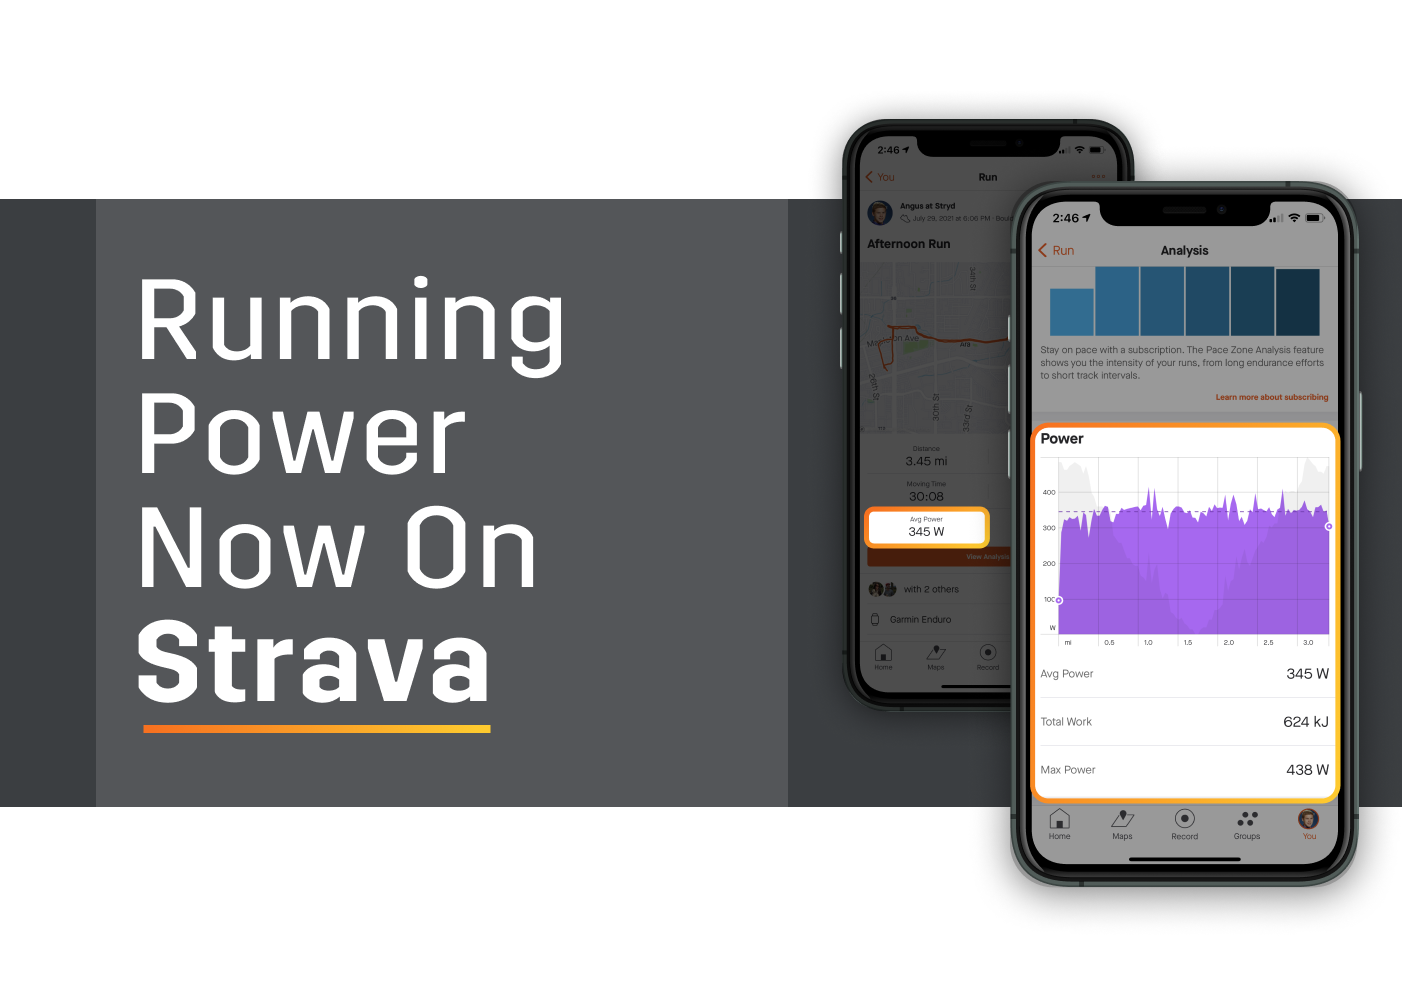 Does Stryd work with strava?